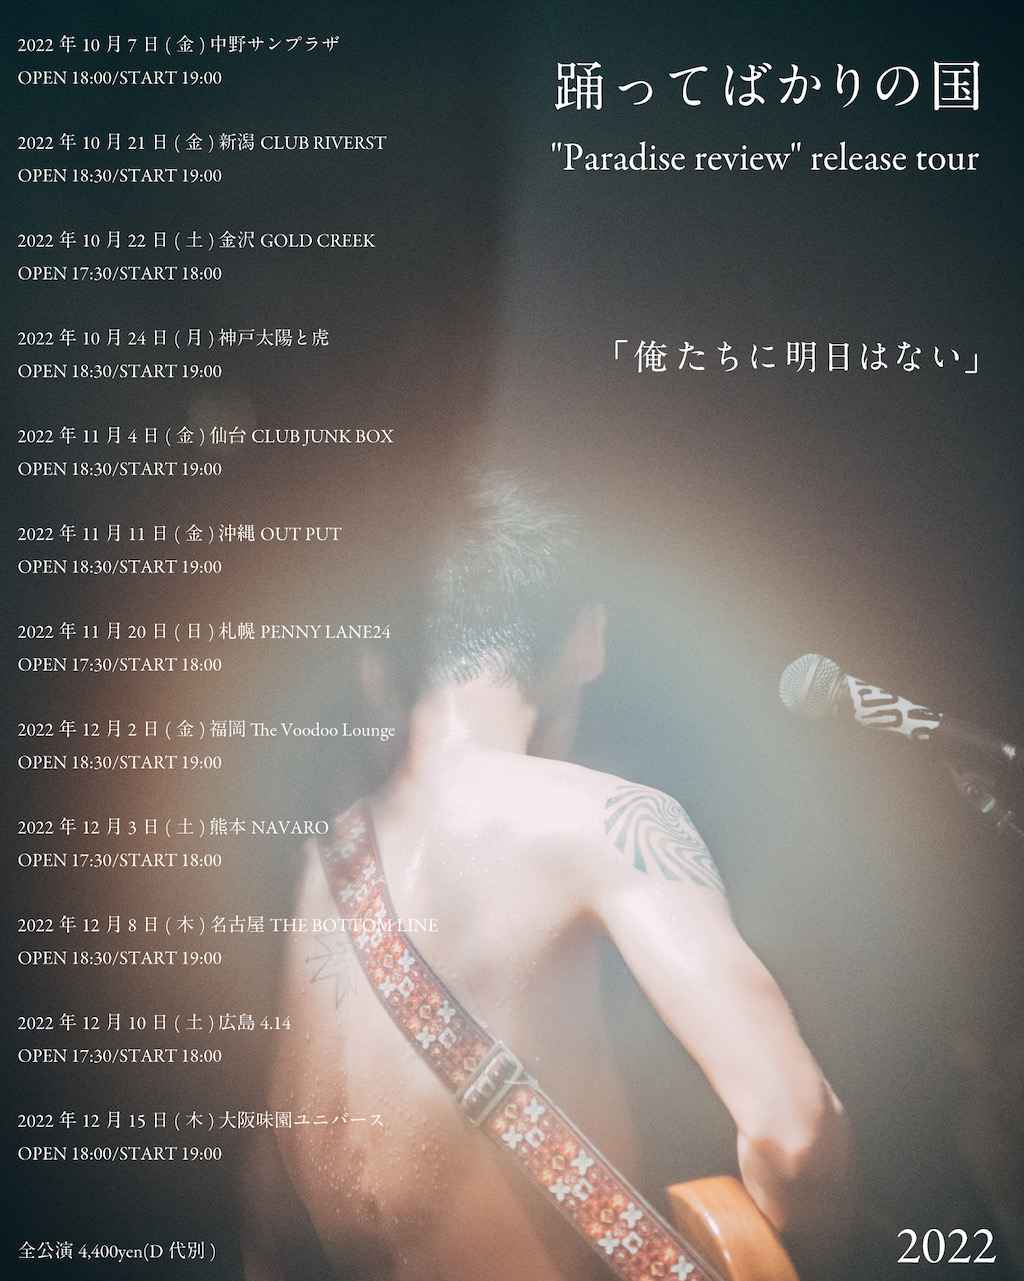 『Paradise review』release tour 「俺たちに明日はない」